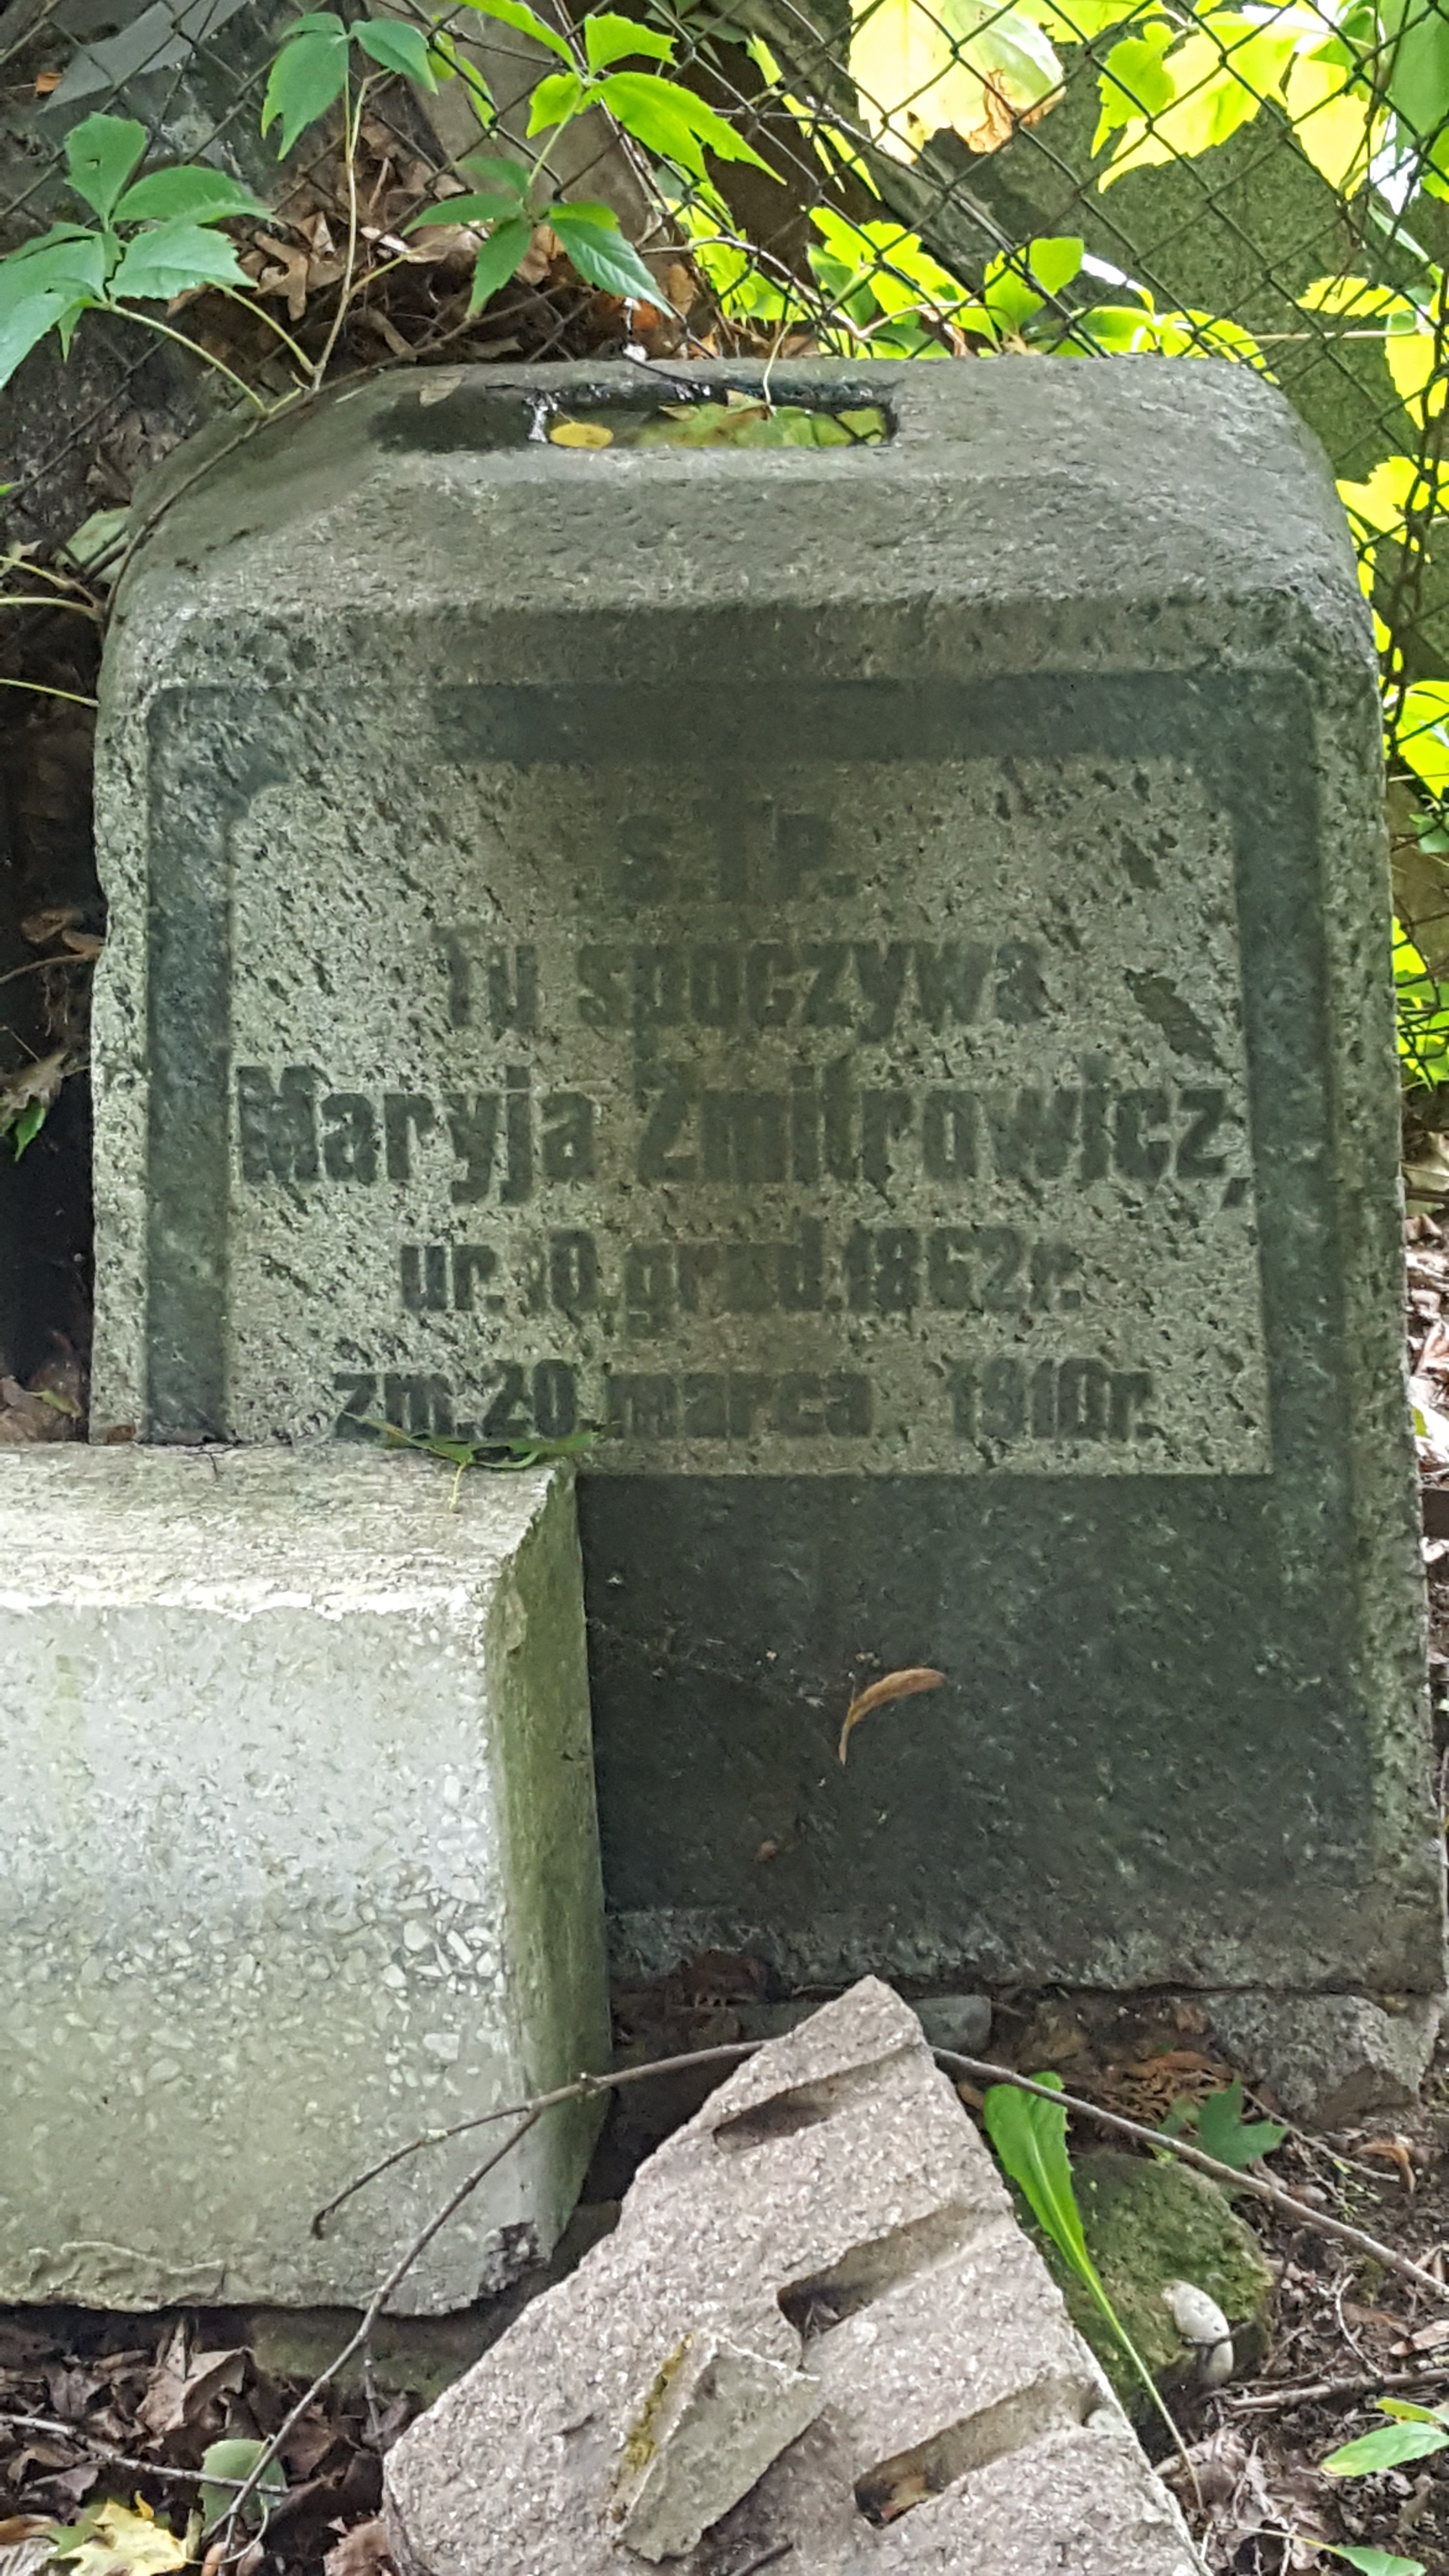 Tombstone of Mary Zmitrovich, St Michael's cemetery in Riga, as of 2021.